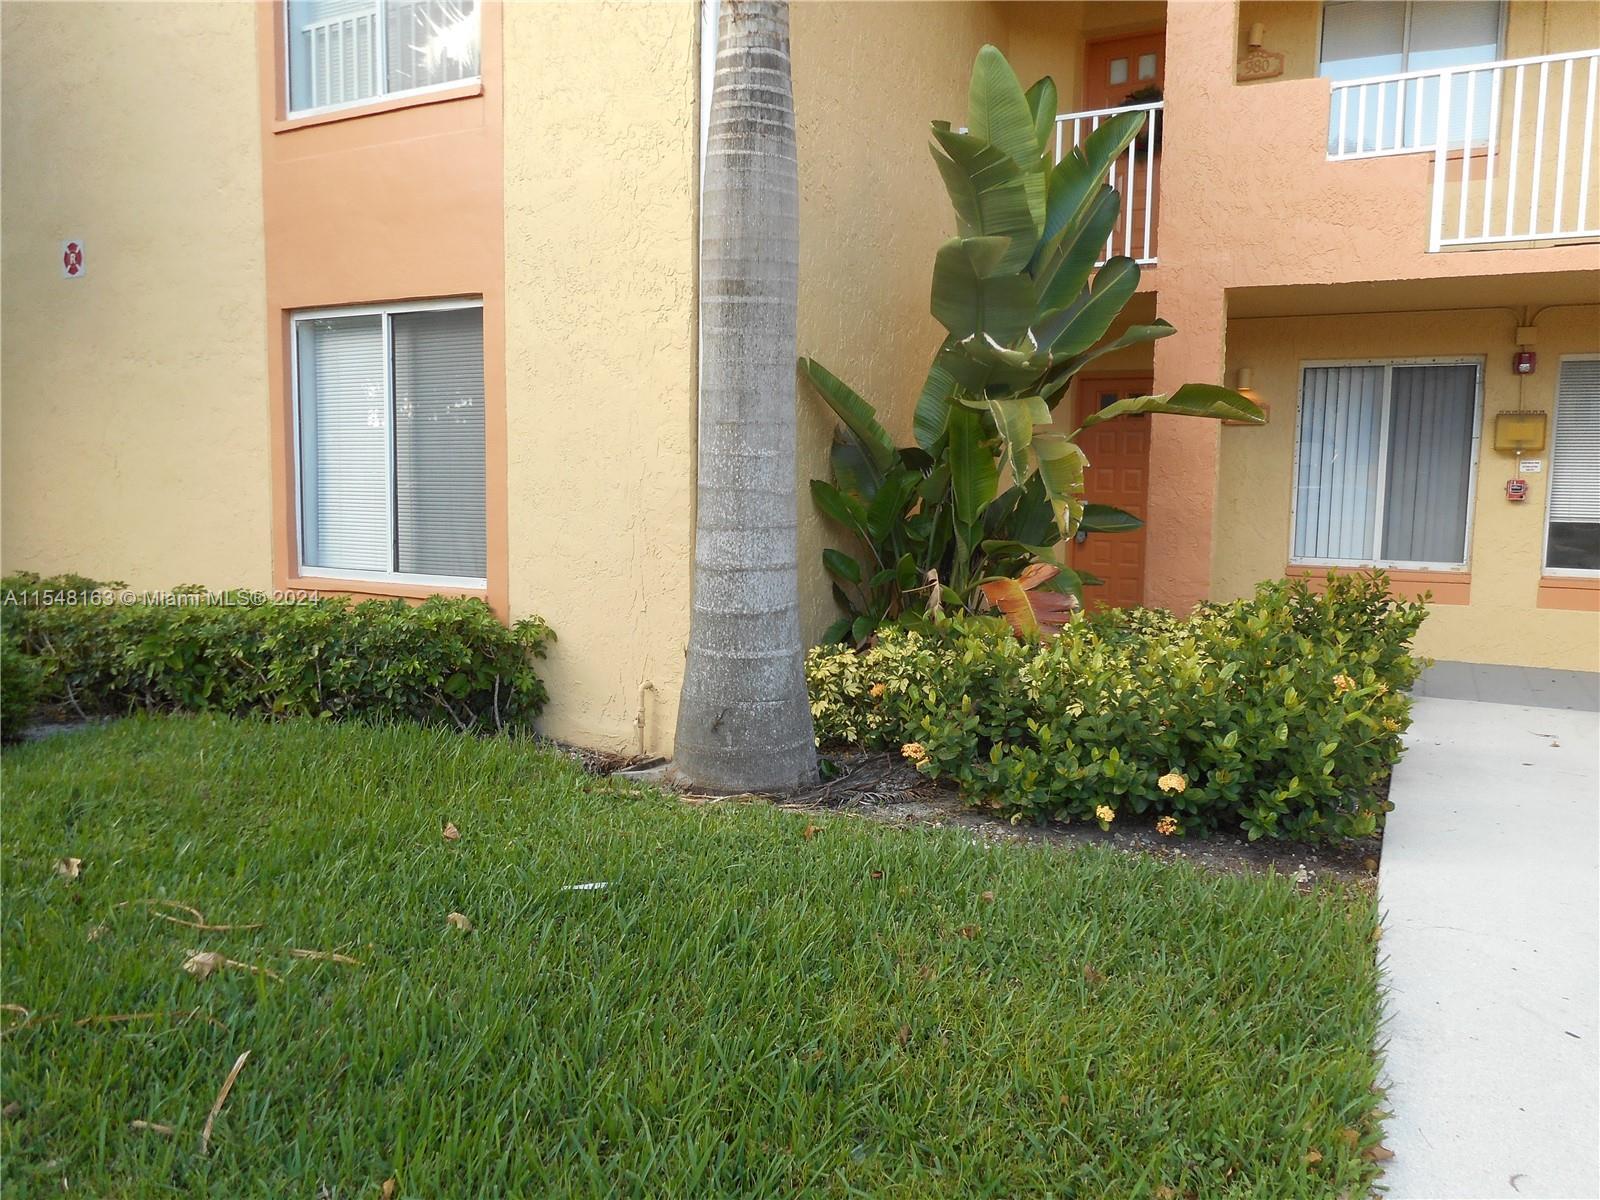 Photo of 978 Coral Club Dr #978 in Coral Springs, FL